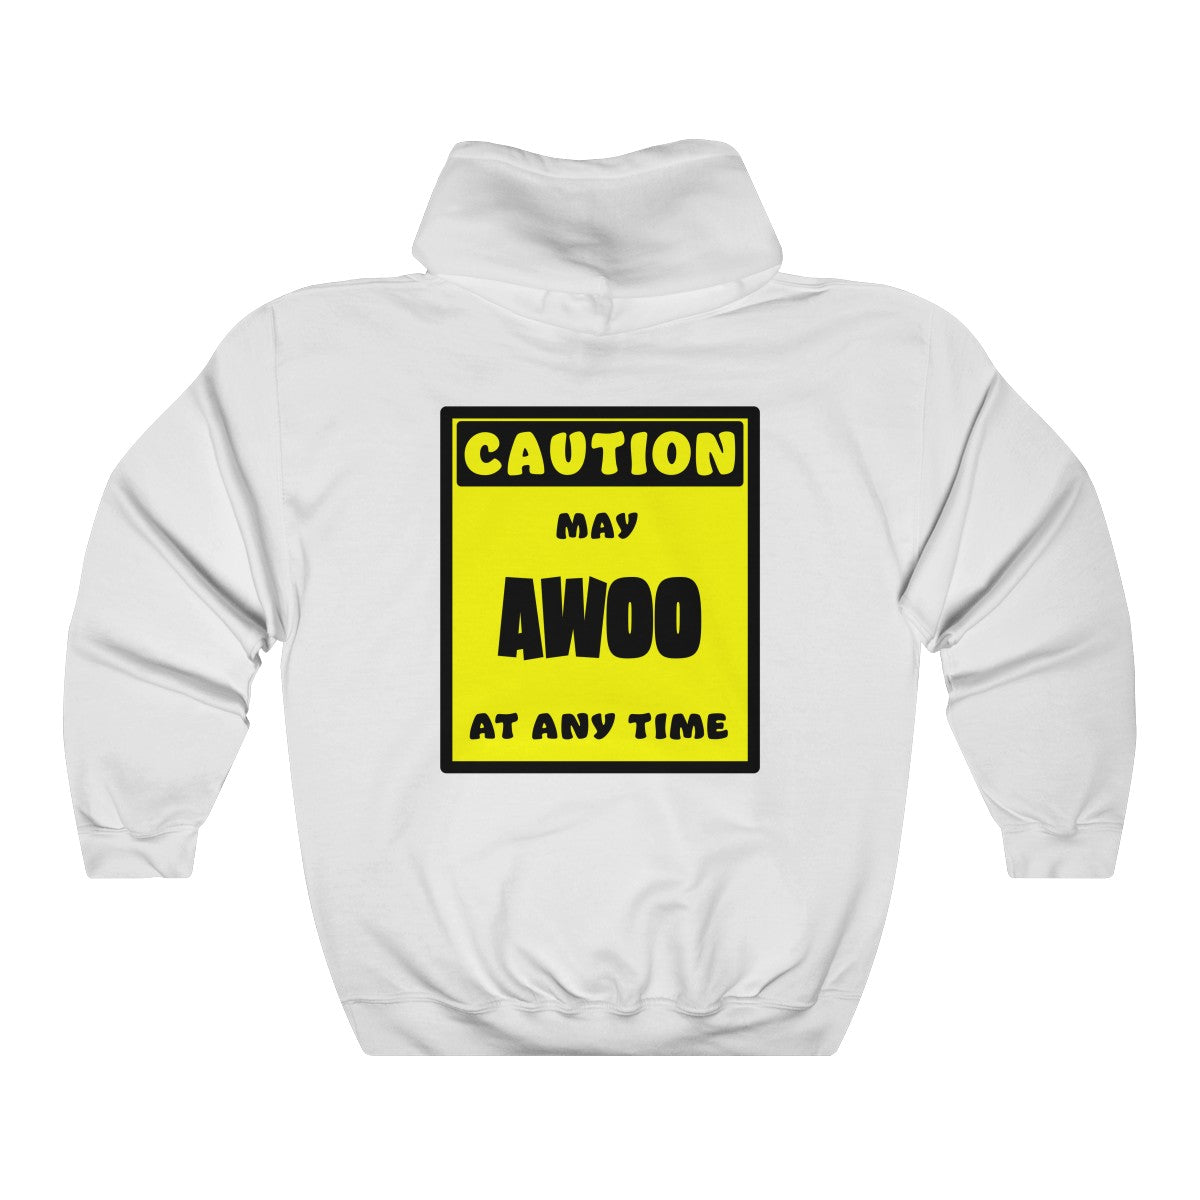 CAUTION! May AWOO at any time! - Hoodie Hoodie AFLT-Whootorca White S 